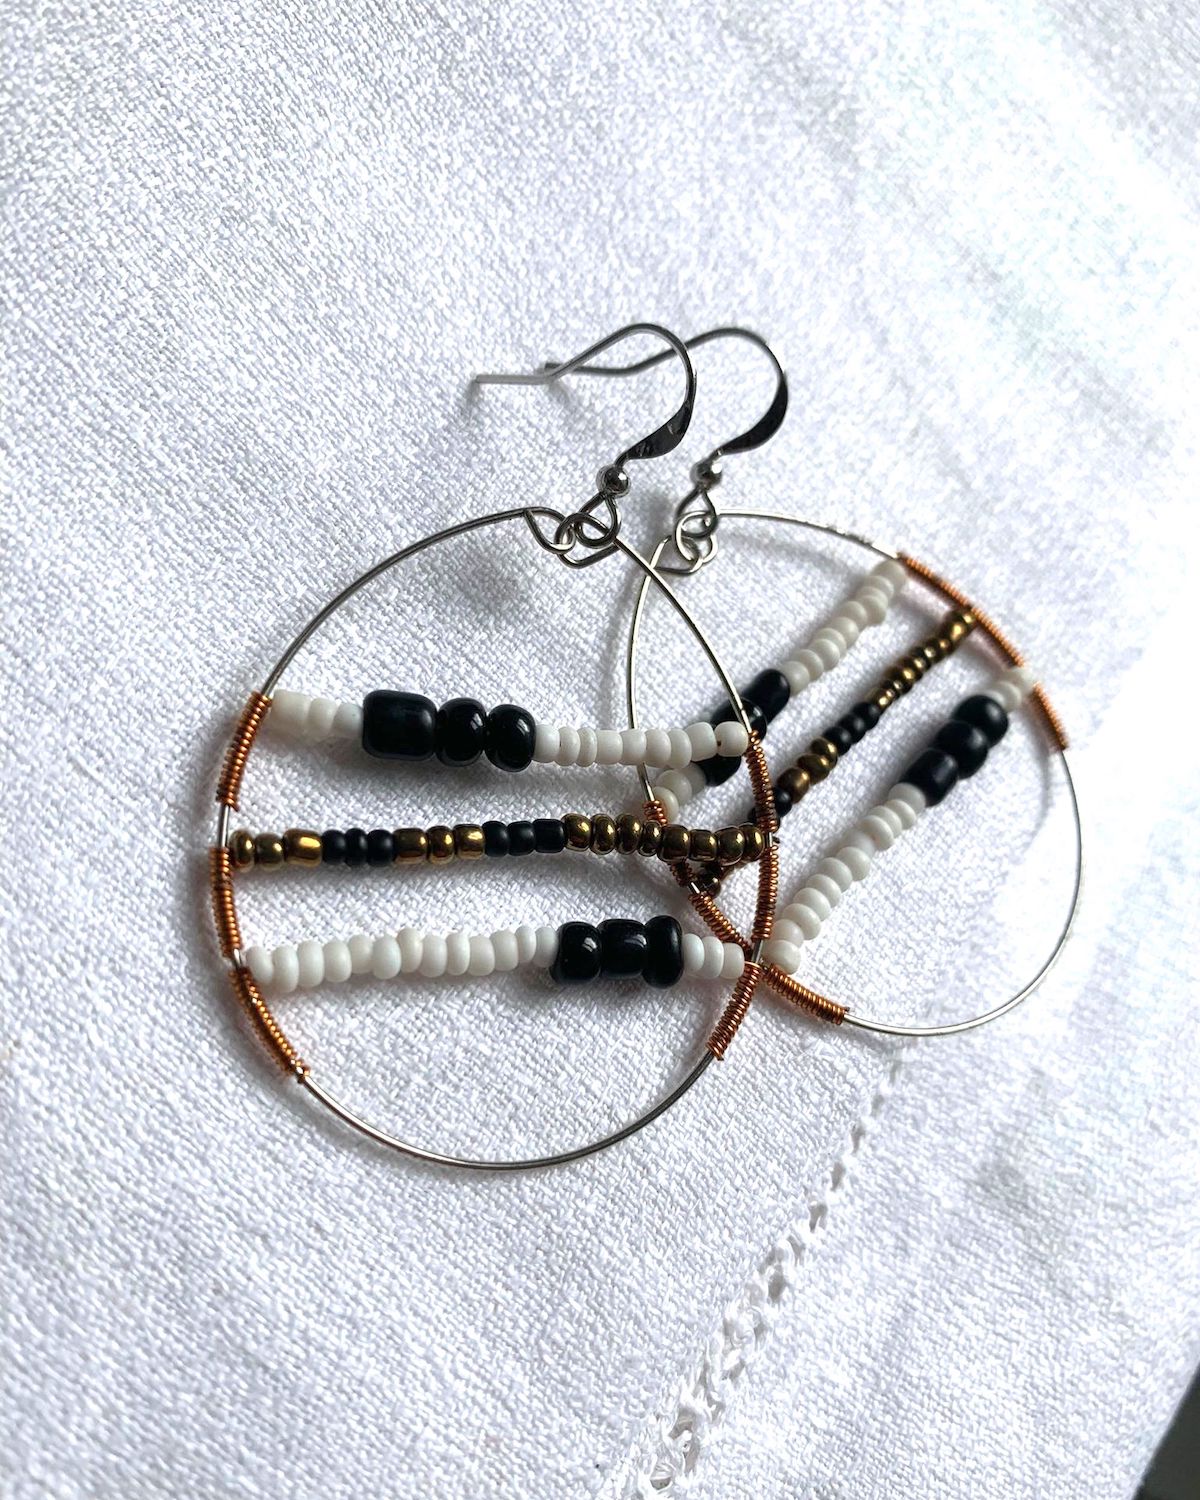 Beaded Drop Earrings in White, Black and Copper | Cute Ethical Earrings | Artisan Jewellery - YGN Collective